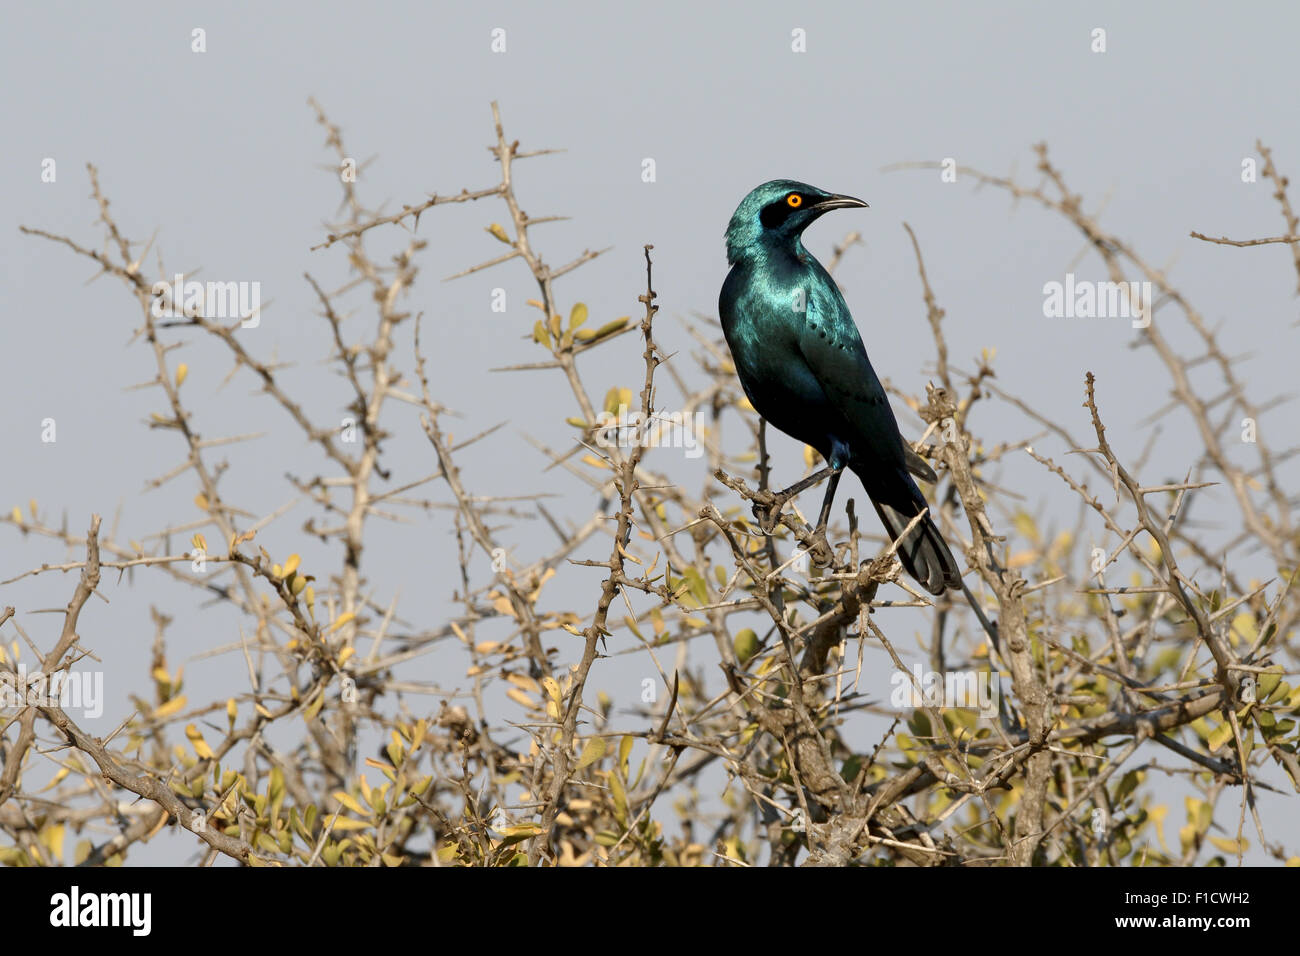 Cape starling, Lamprotornis nitens, single bird on branch, South Africa, August 2015 Stock Photo